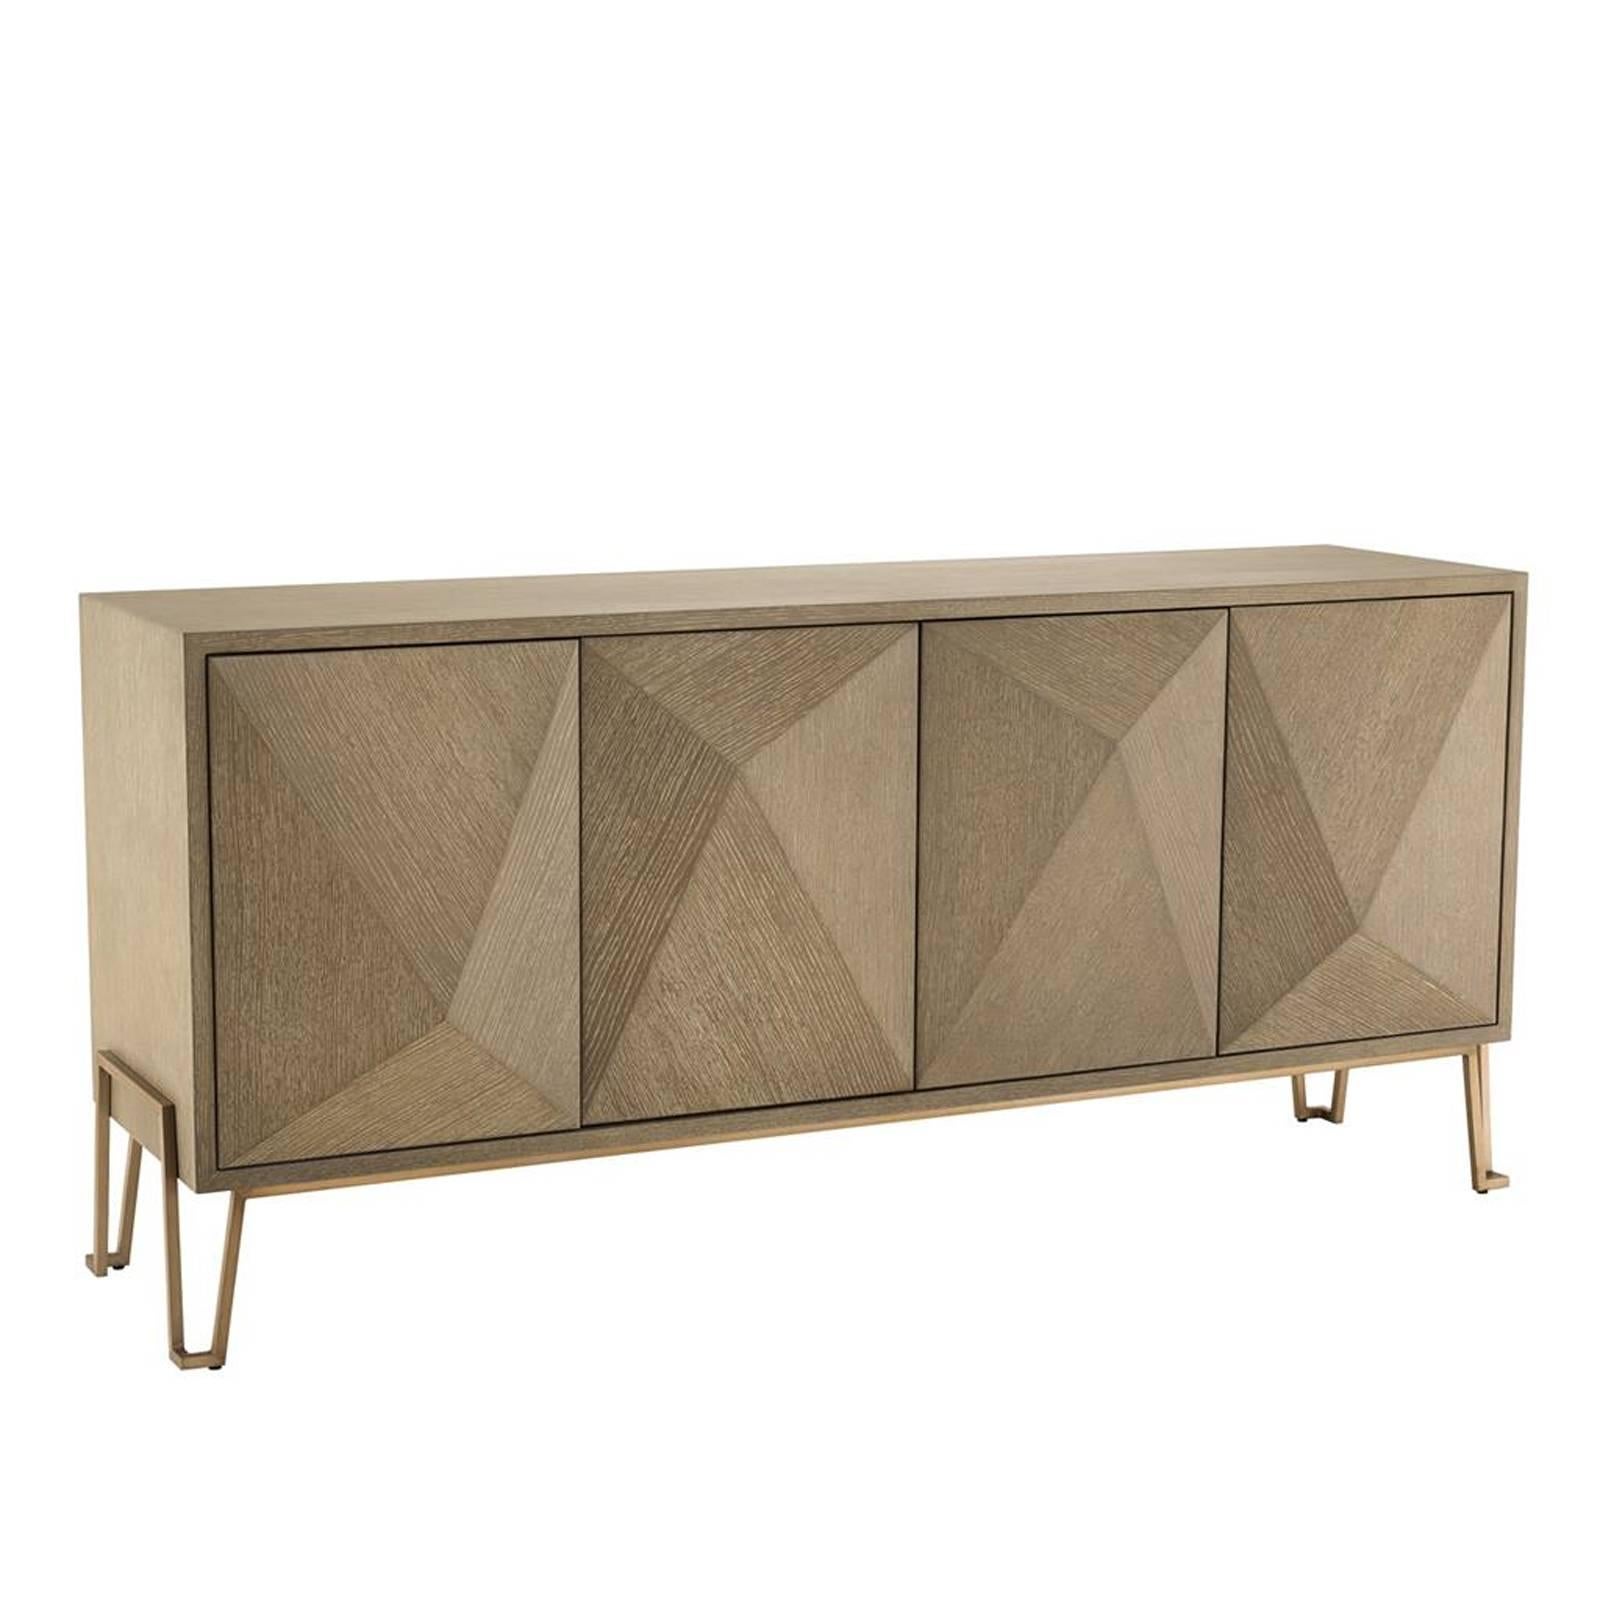 Sideboard Catalaga with structure in solid oak,
washed oak veneer finish. Finishes in brushed
brass. With four opening doors.
